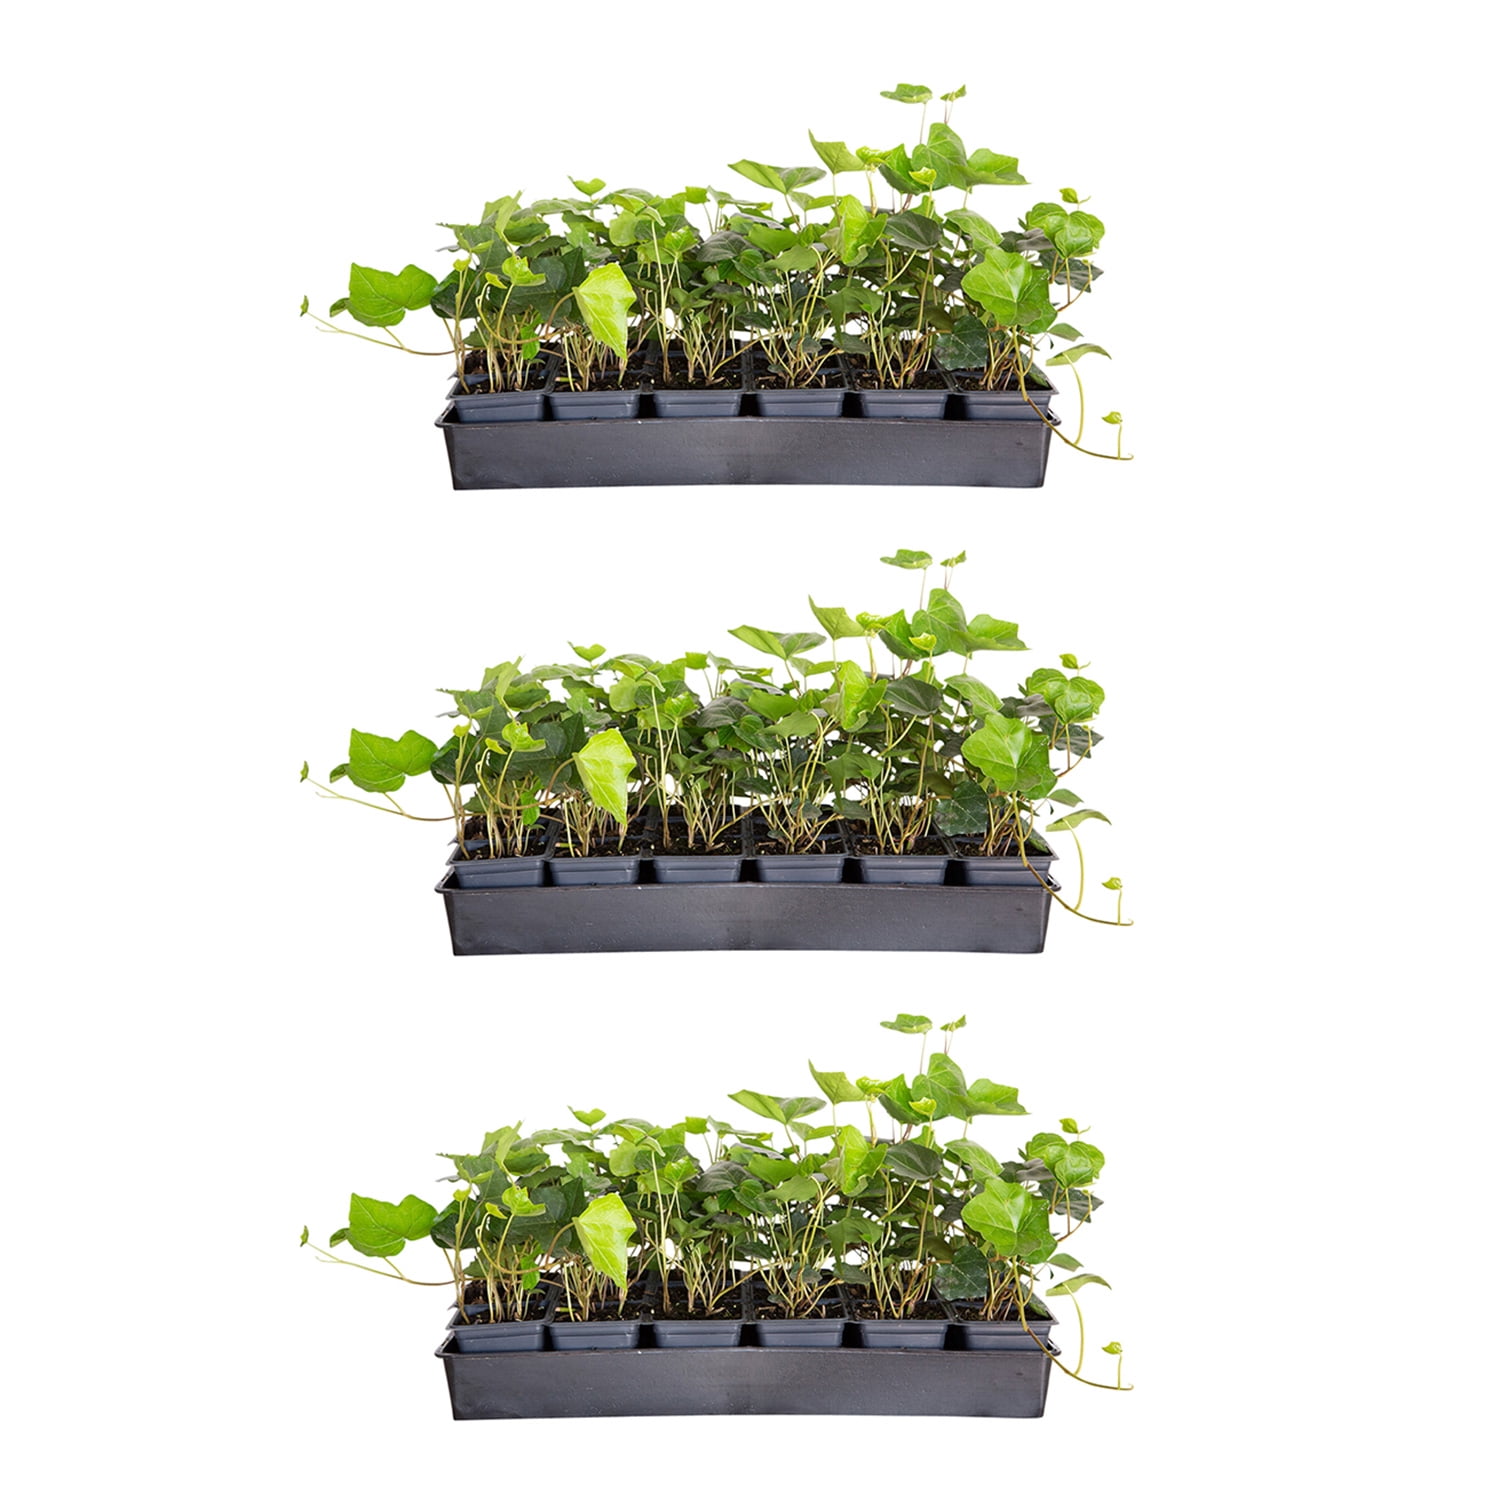 Sun/Shade-2 Pack 3 Pots Hardy Groundcover/House Plant Gold Child English Ivy